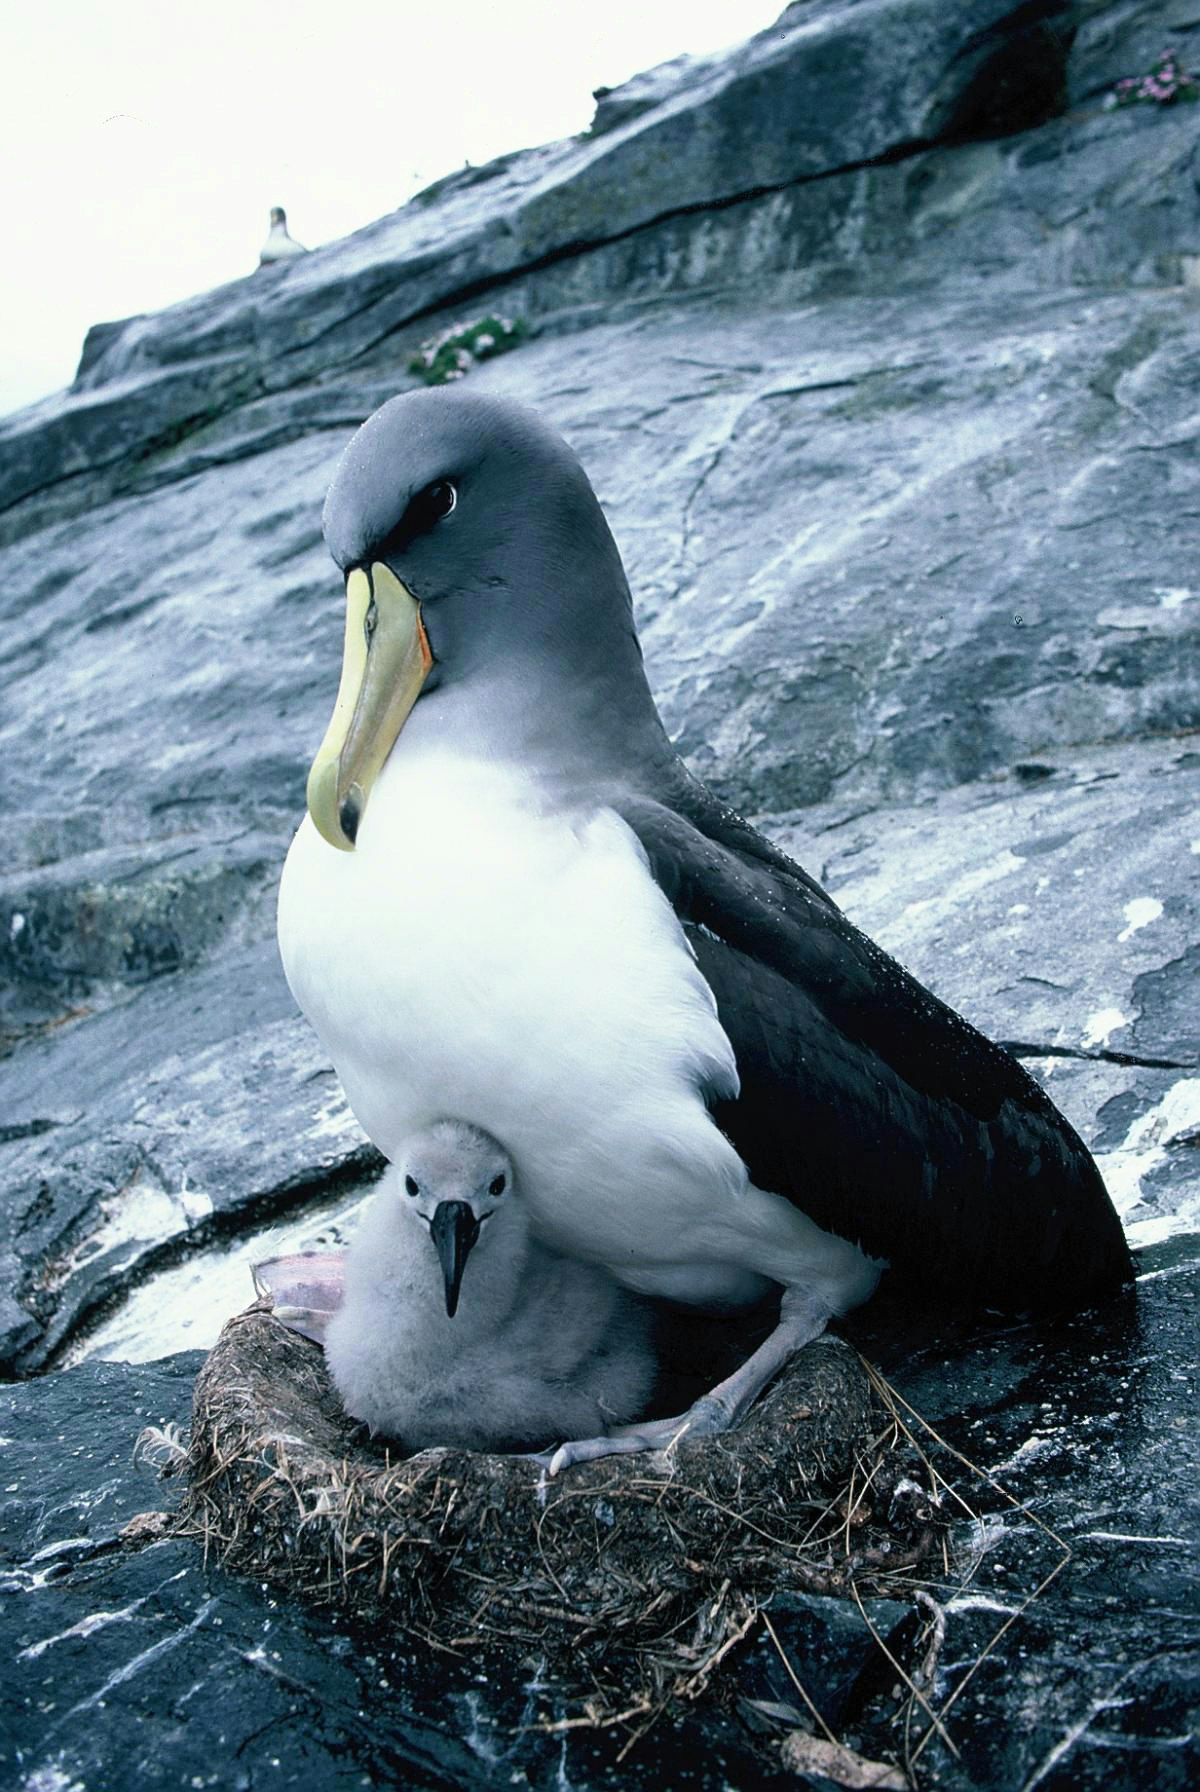 An adult albatross sitting over a fluffy chick on the side of a cliff